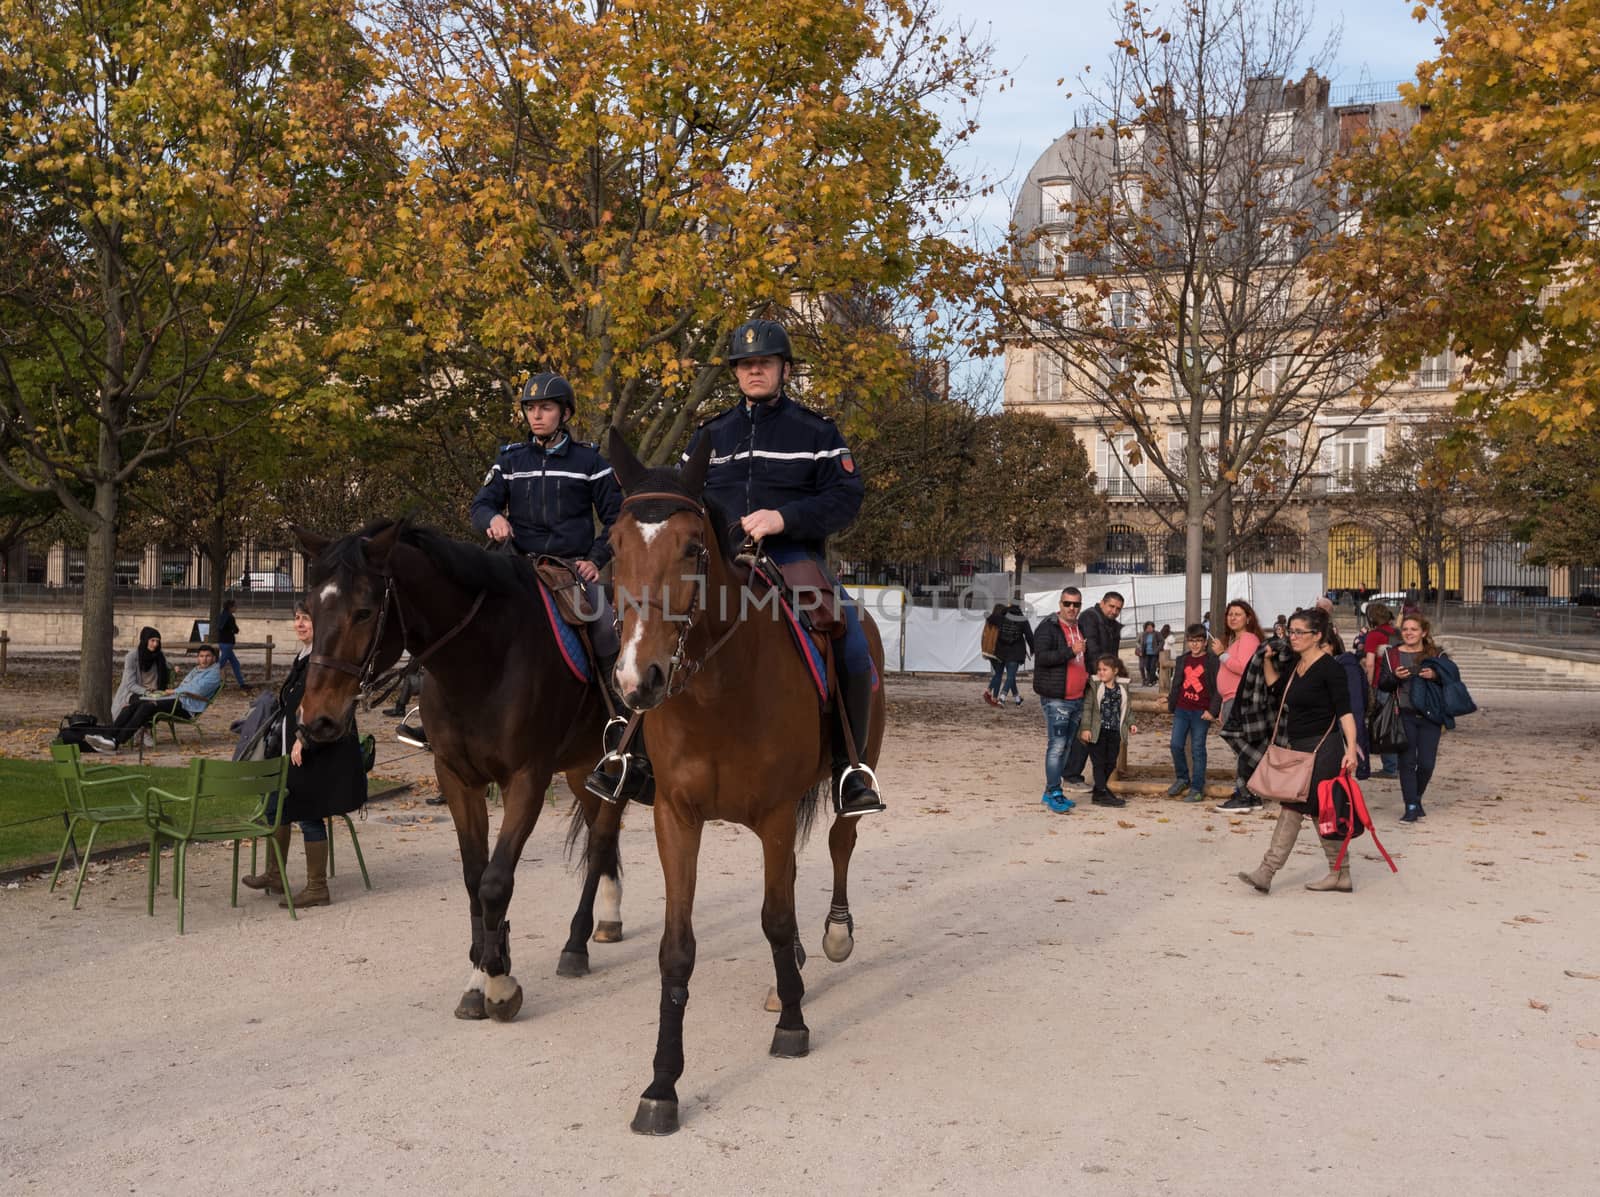 Paris, France -- November 3, 2017 -- Mounted French police officers patrol the Tuileries Gardens.